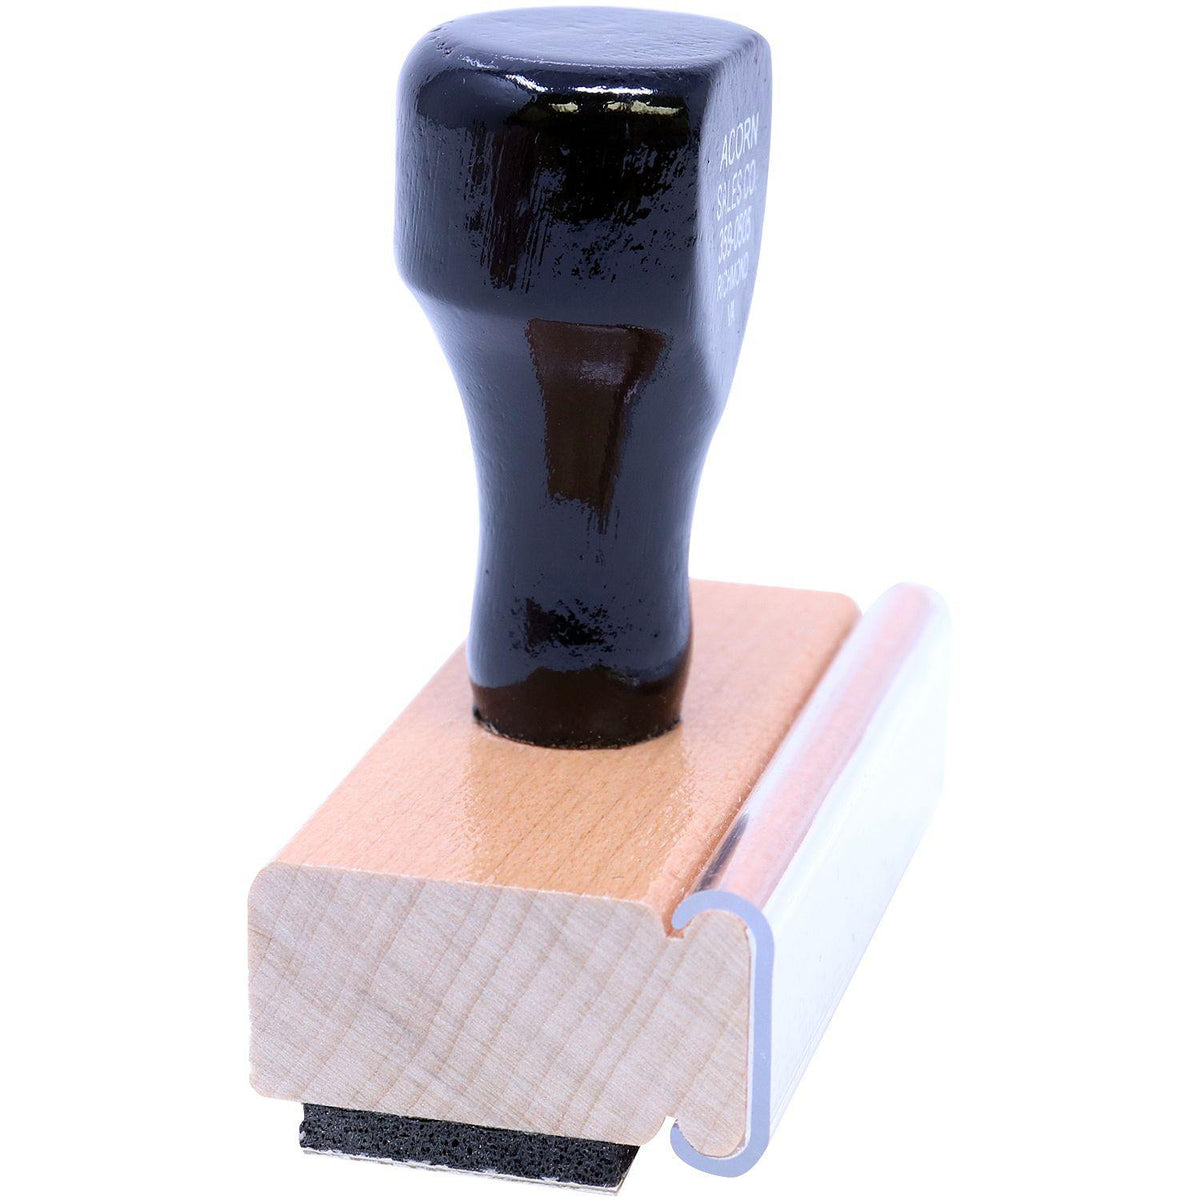 Side View of Faxed with Date Box Rubber Stamp at an Angle